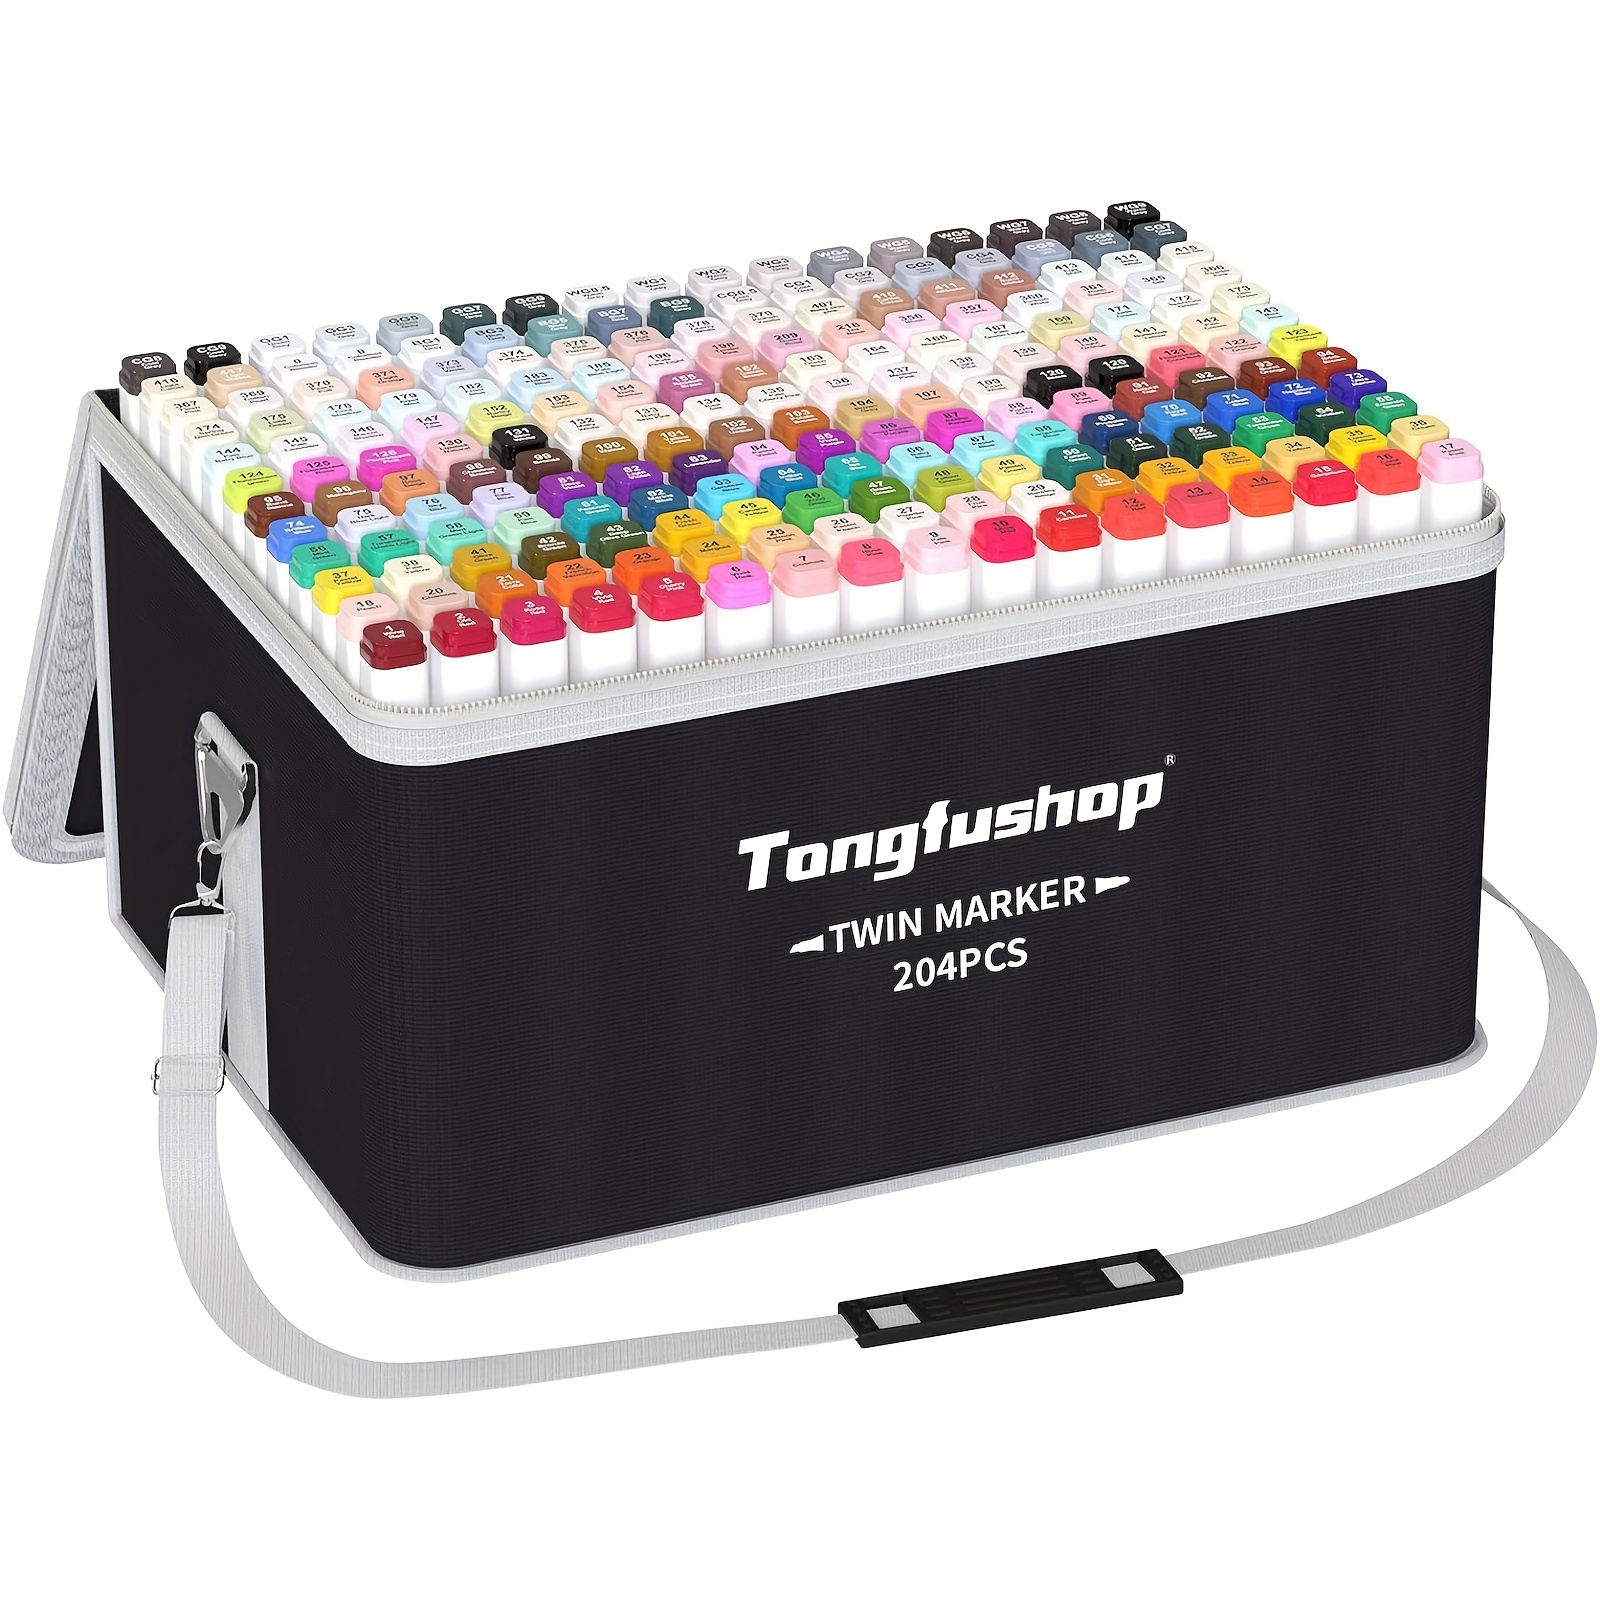 

Tongfushop 204 Colors Alcohol Markers, Double Tip Blender Art Drawing Markers Set, Professional Permanent Sketch Markers For Coloring Illustrations With Organizing Case, Pad